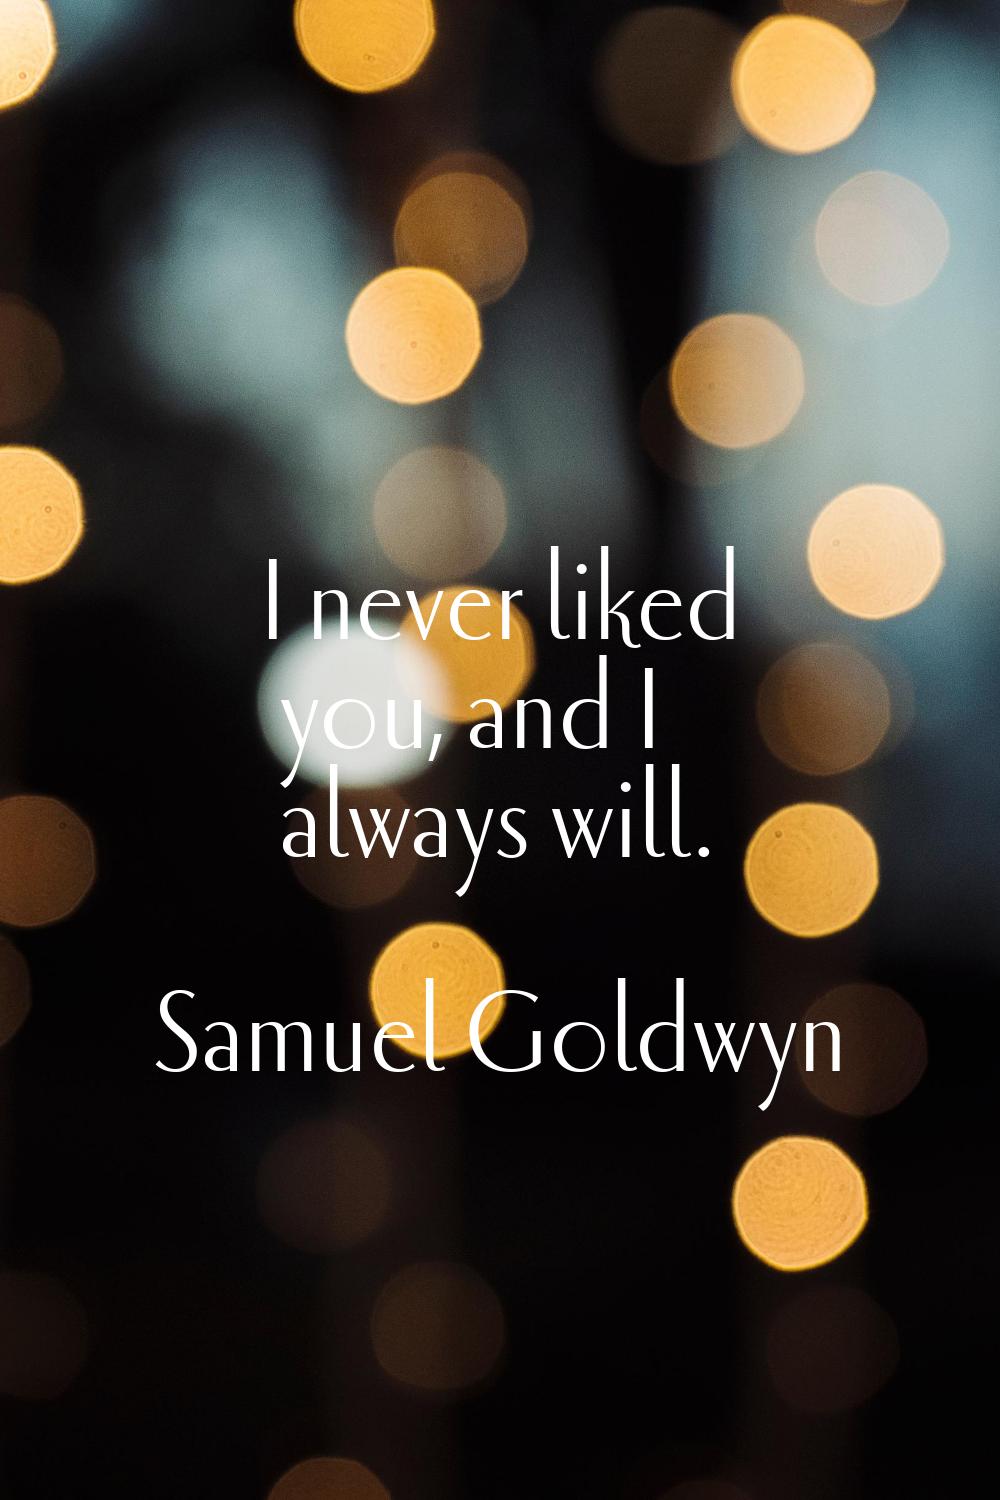 I never liked you, and I always will.